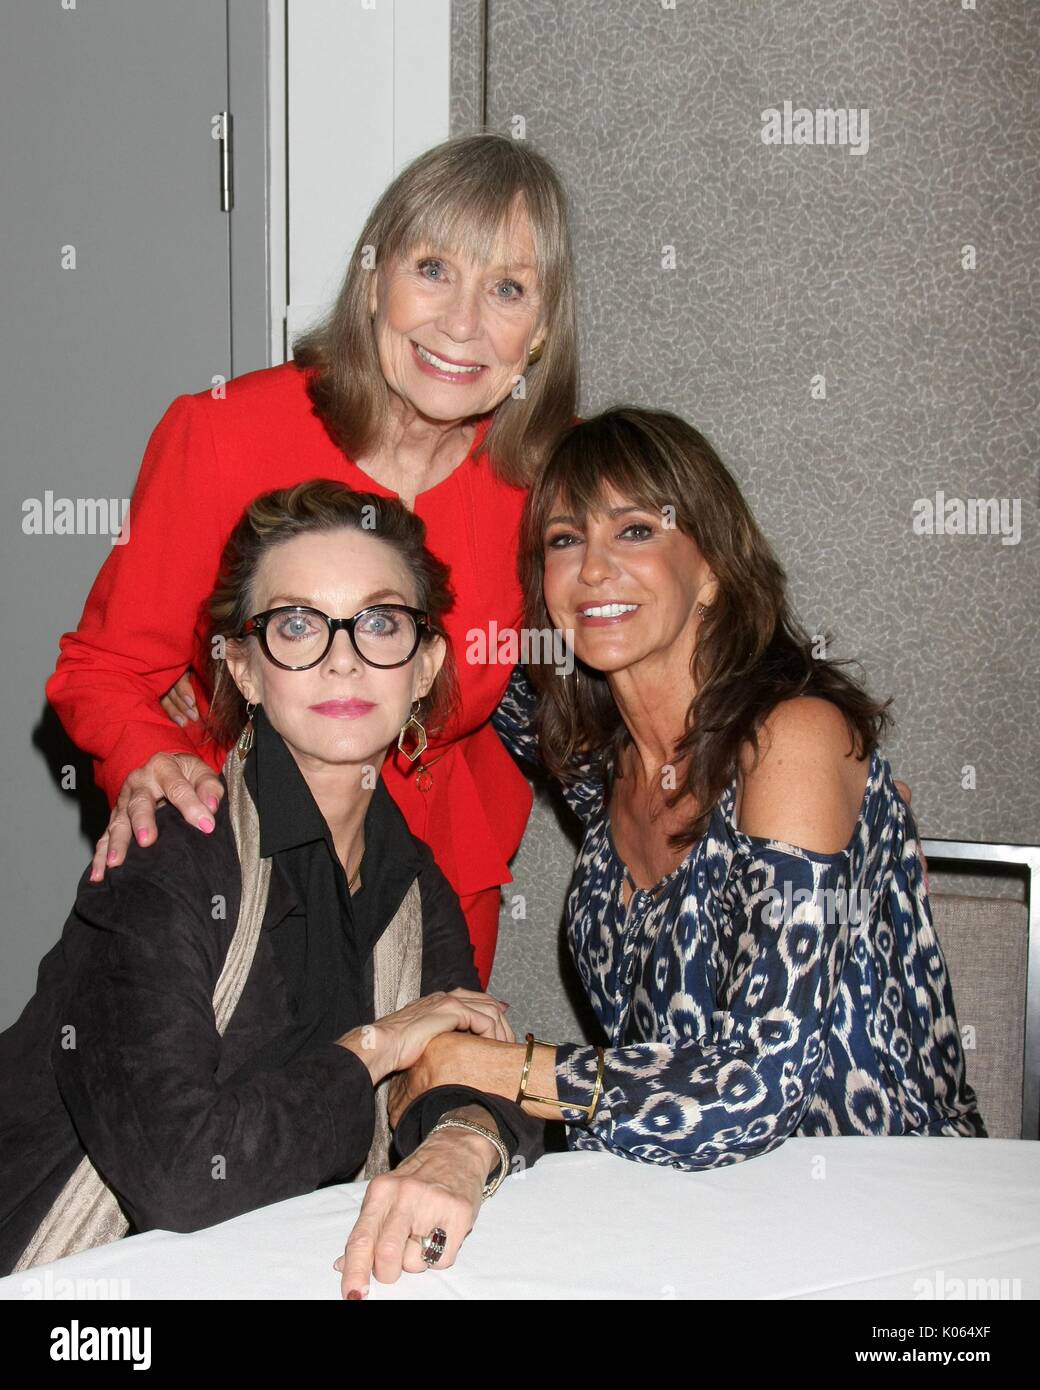 Judith Chapman, Marla Adams, Jess Walton in attendance for YOUNG AND RESTLESS Fan Club Dinner, Burbank Convention Center, Burbank, CA August 19, 2017. Photo By: Priscilla Grant/Everett Collection Stock Photo